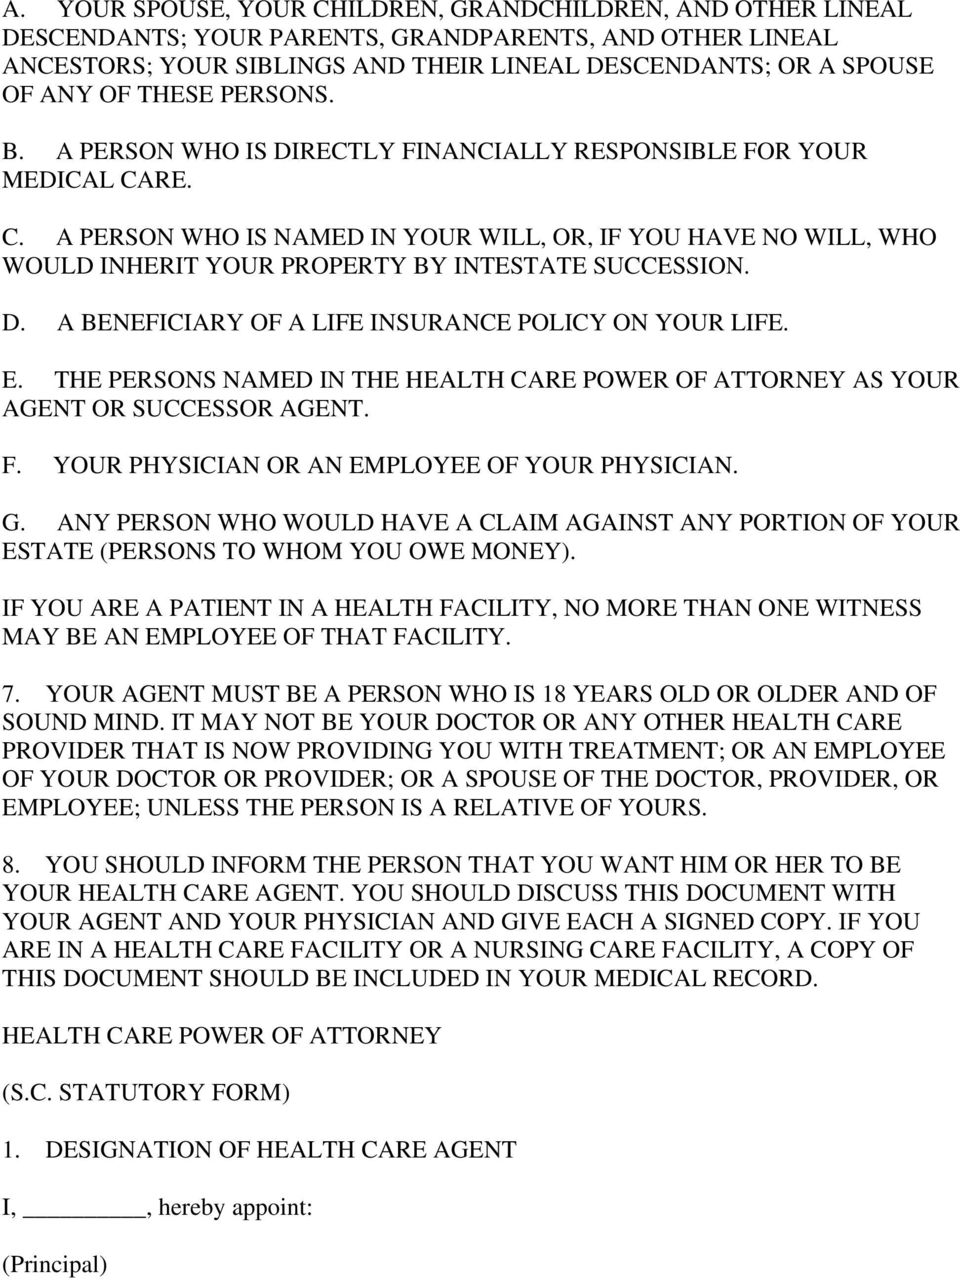 D. A BENEFICIARY OF A LIFE INSURANCE POLICY ON YOUR LIFE. E. THE PERSONS NAMED IN THE HEALTH CARE POWER OF ATTNEY AS YOUR AGENT SUCCESS AGENT. F. YOUR PHYSICIAN AN EMPLOYEE OF YOUR PHYSICIAN. G.